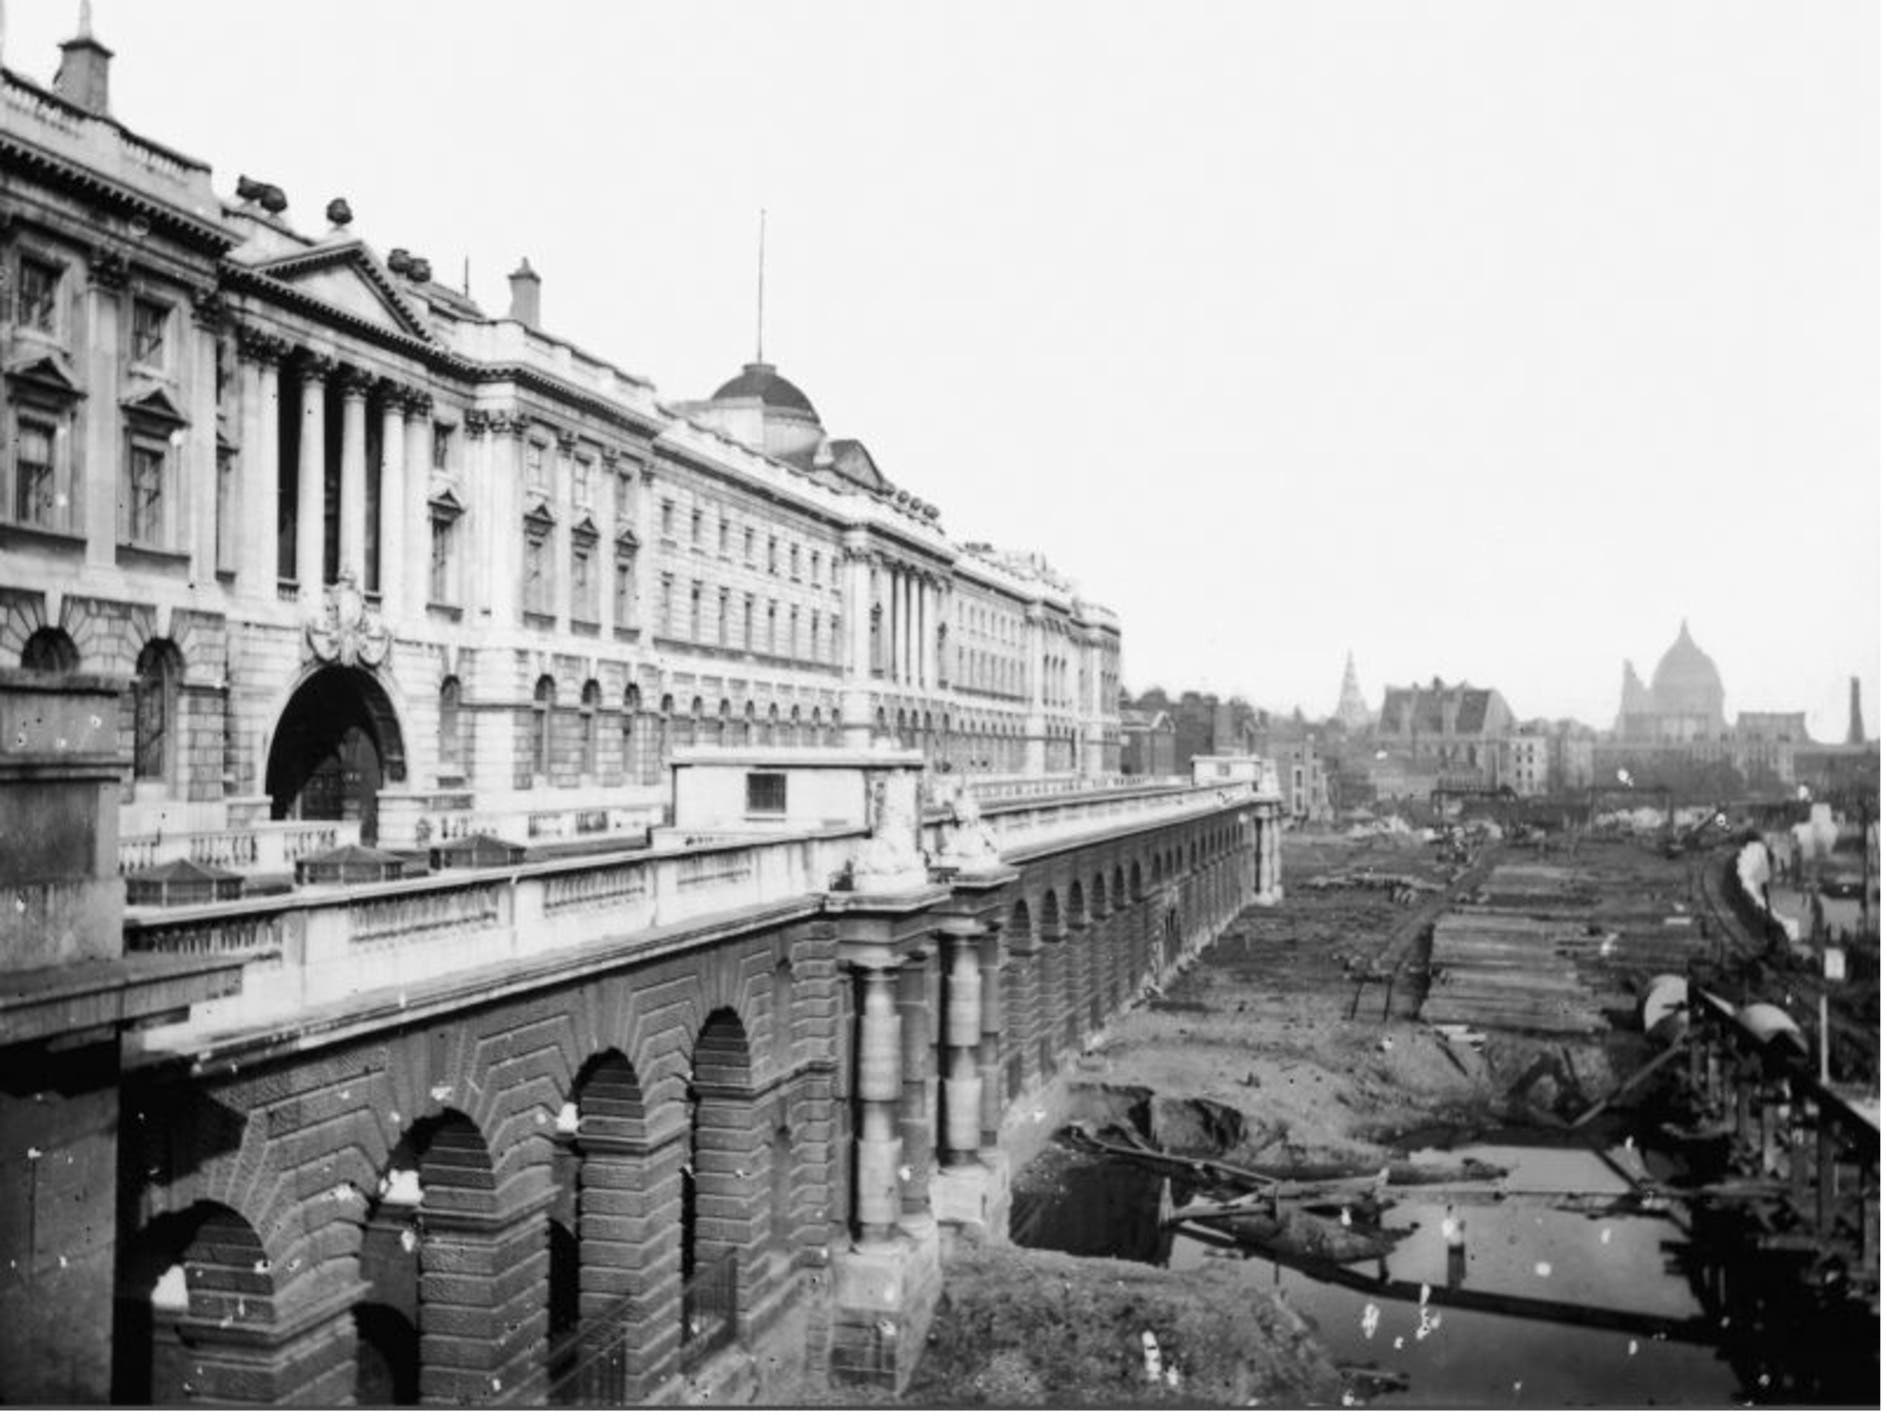 London's Victoria Embankment in the past